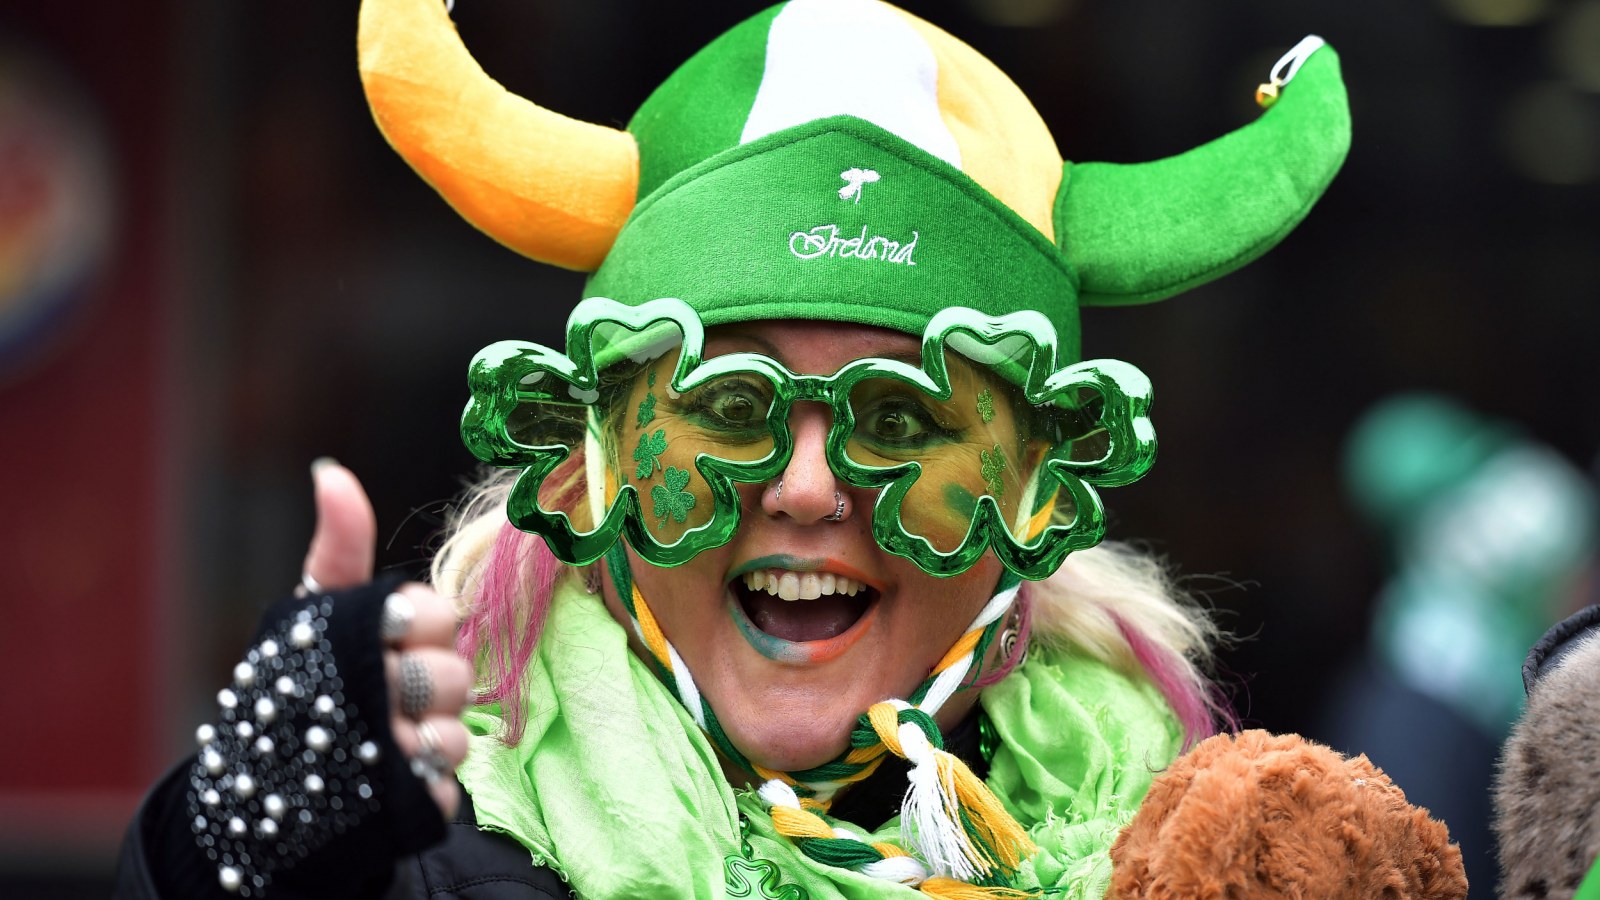 Happy St. Patrick's Day 2022 Memes, Image, Gifs and Quotes to Celebrate